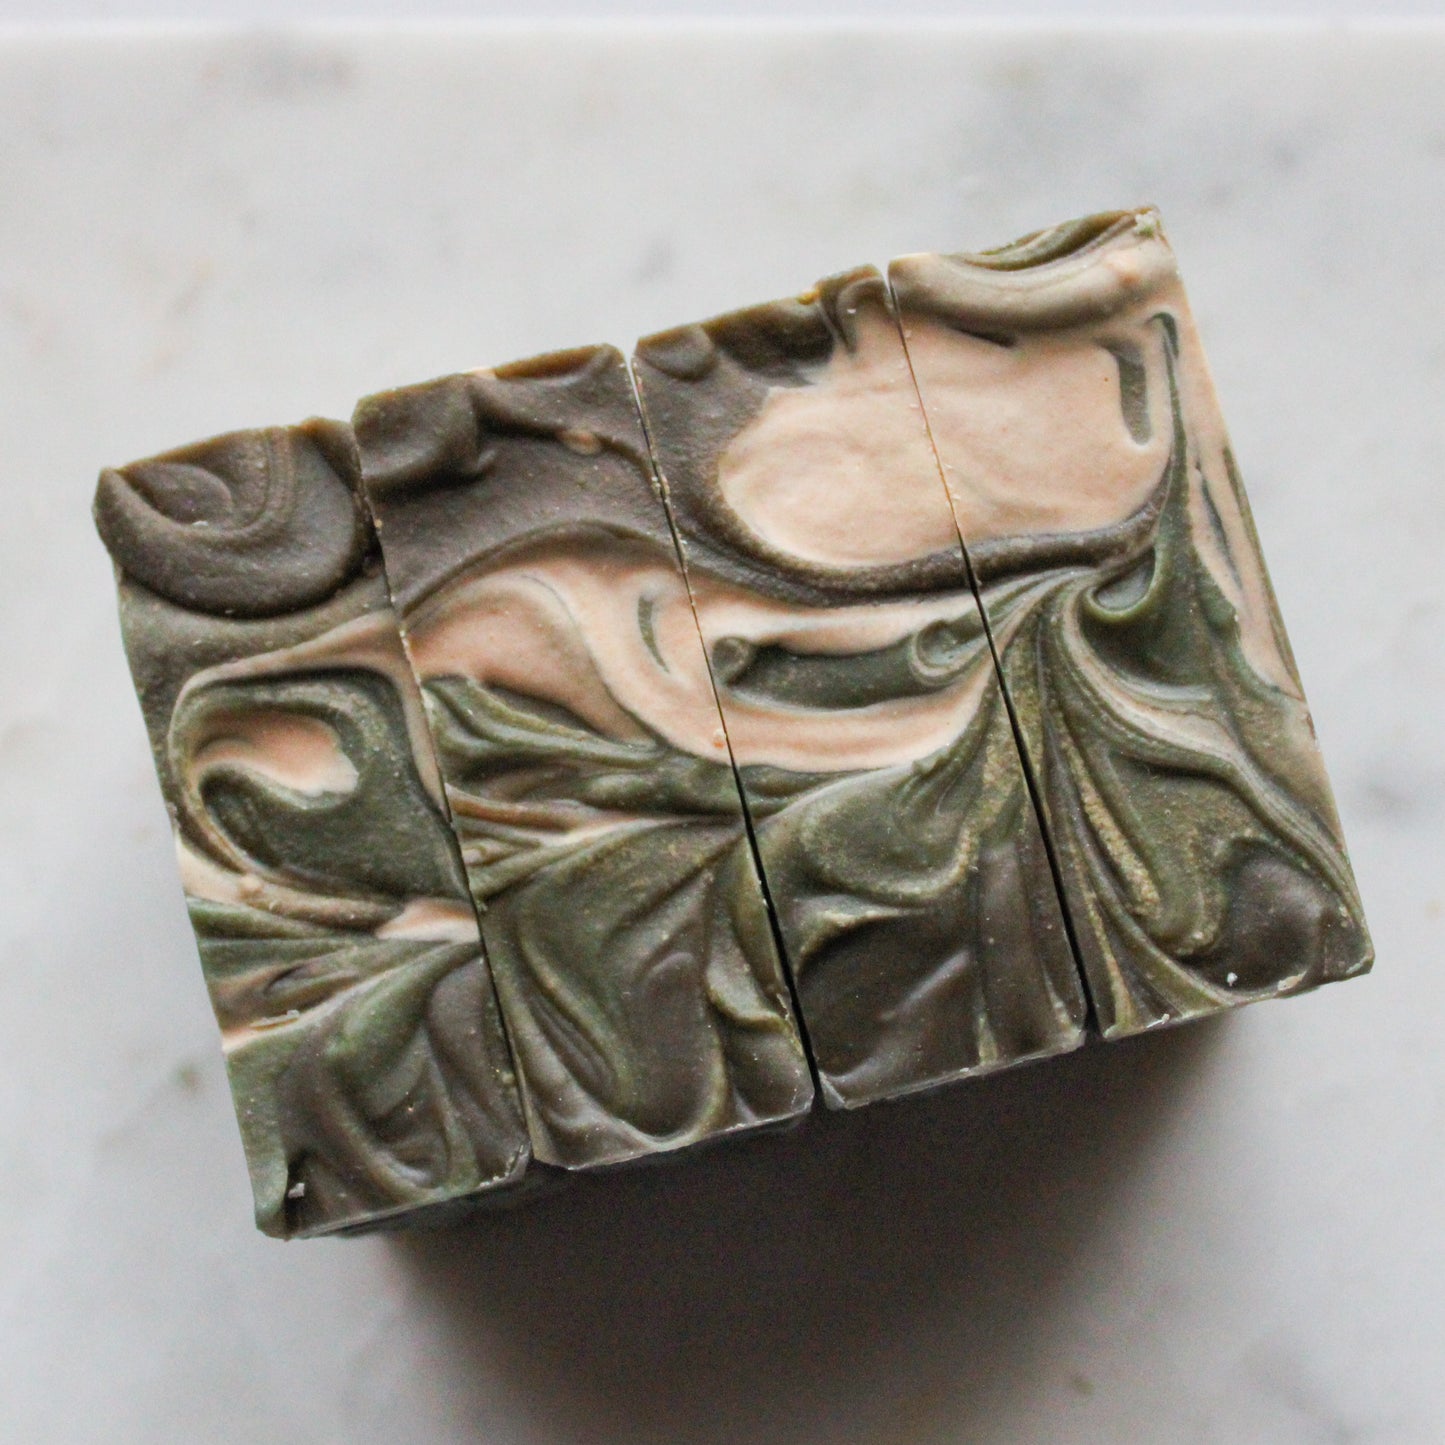 Into the Woods Artisan Soap